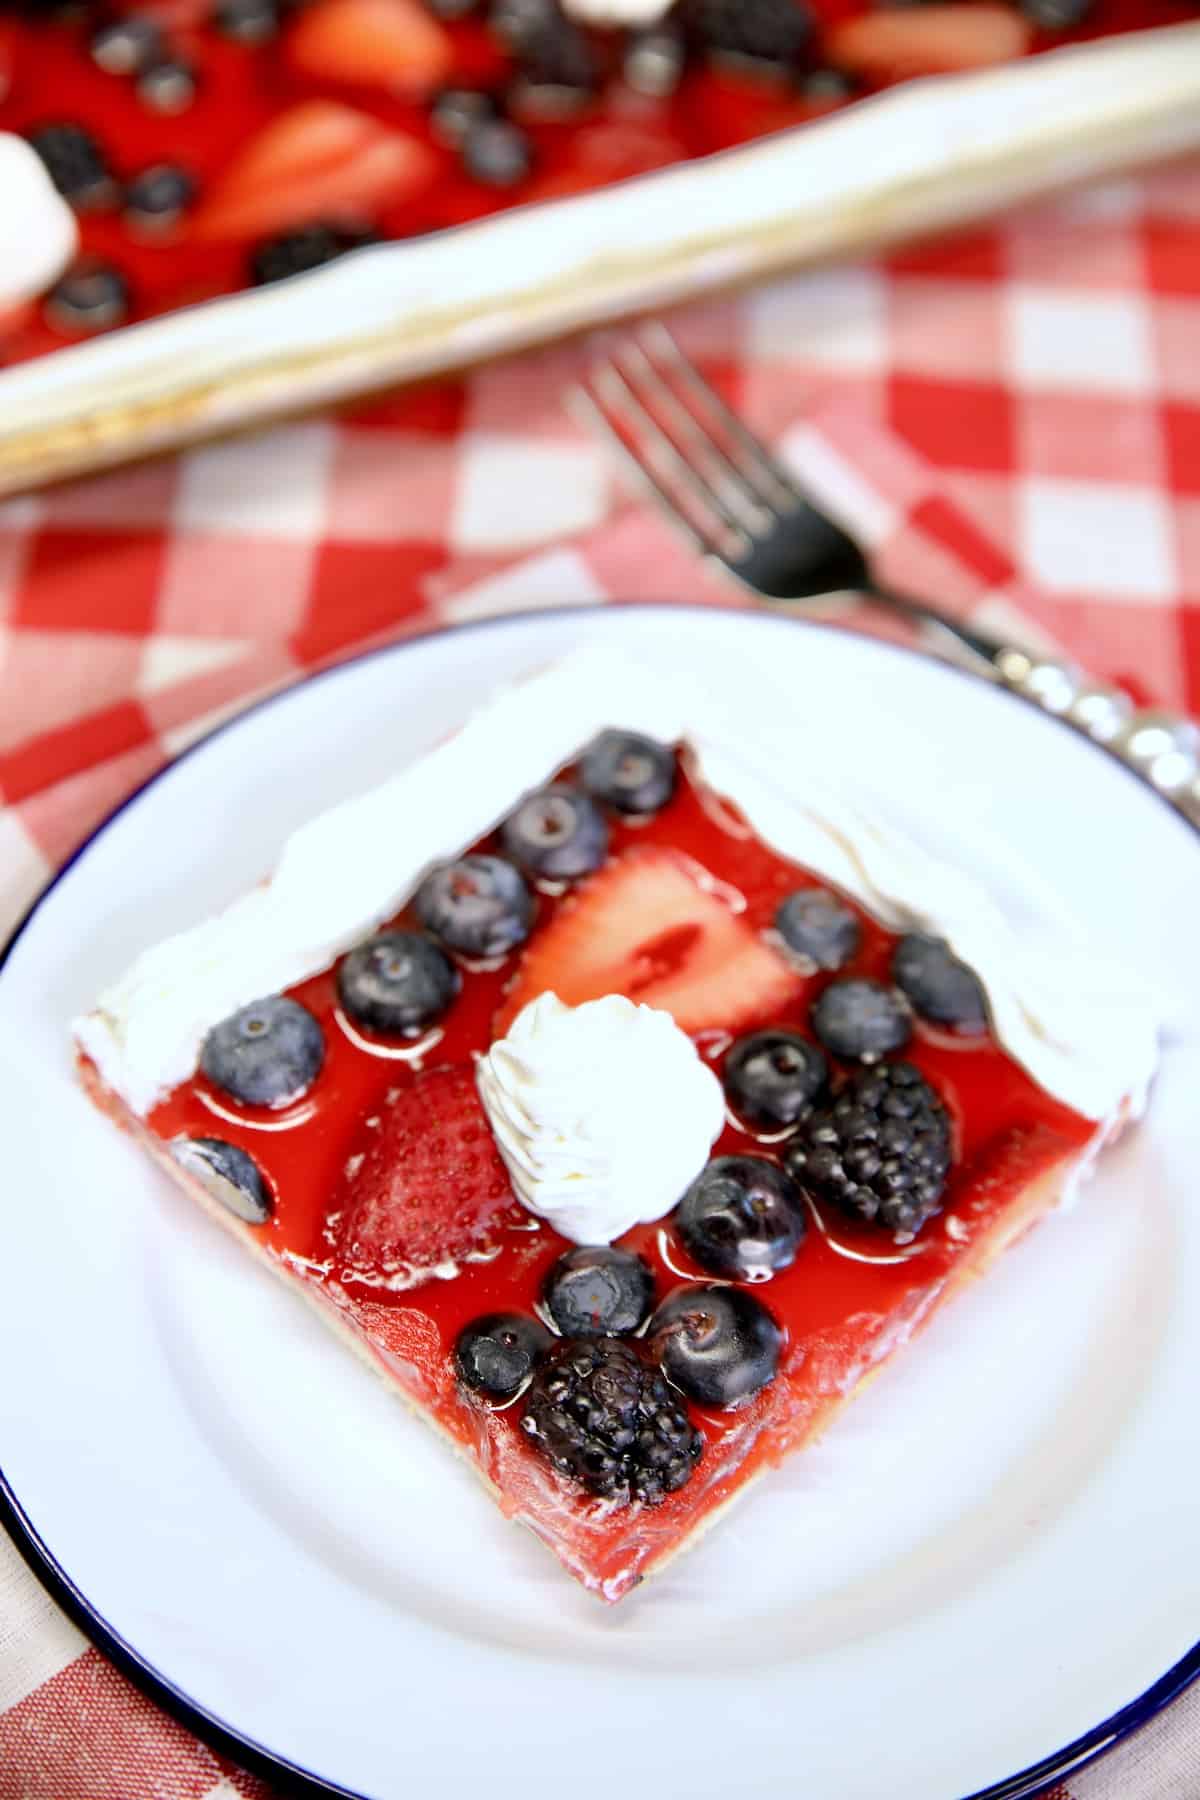 Slice of mixed berry pie with cool whip garnish.